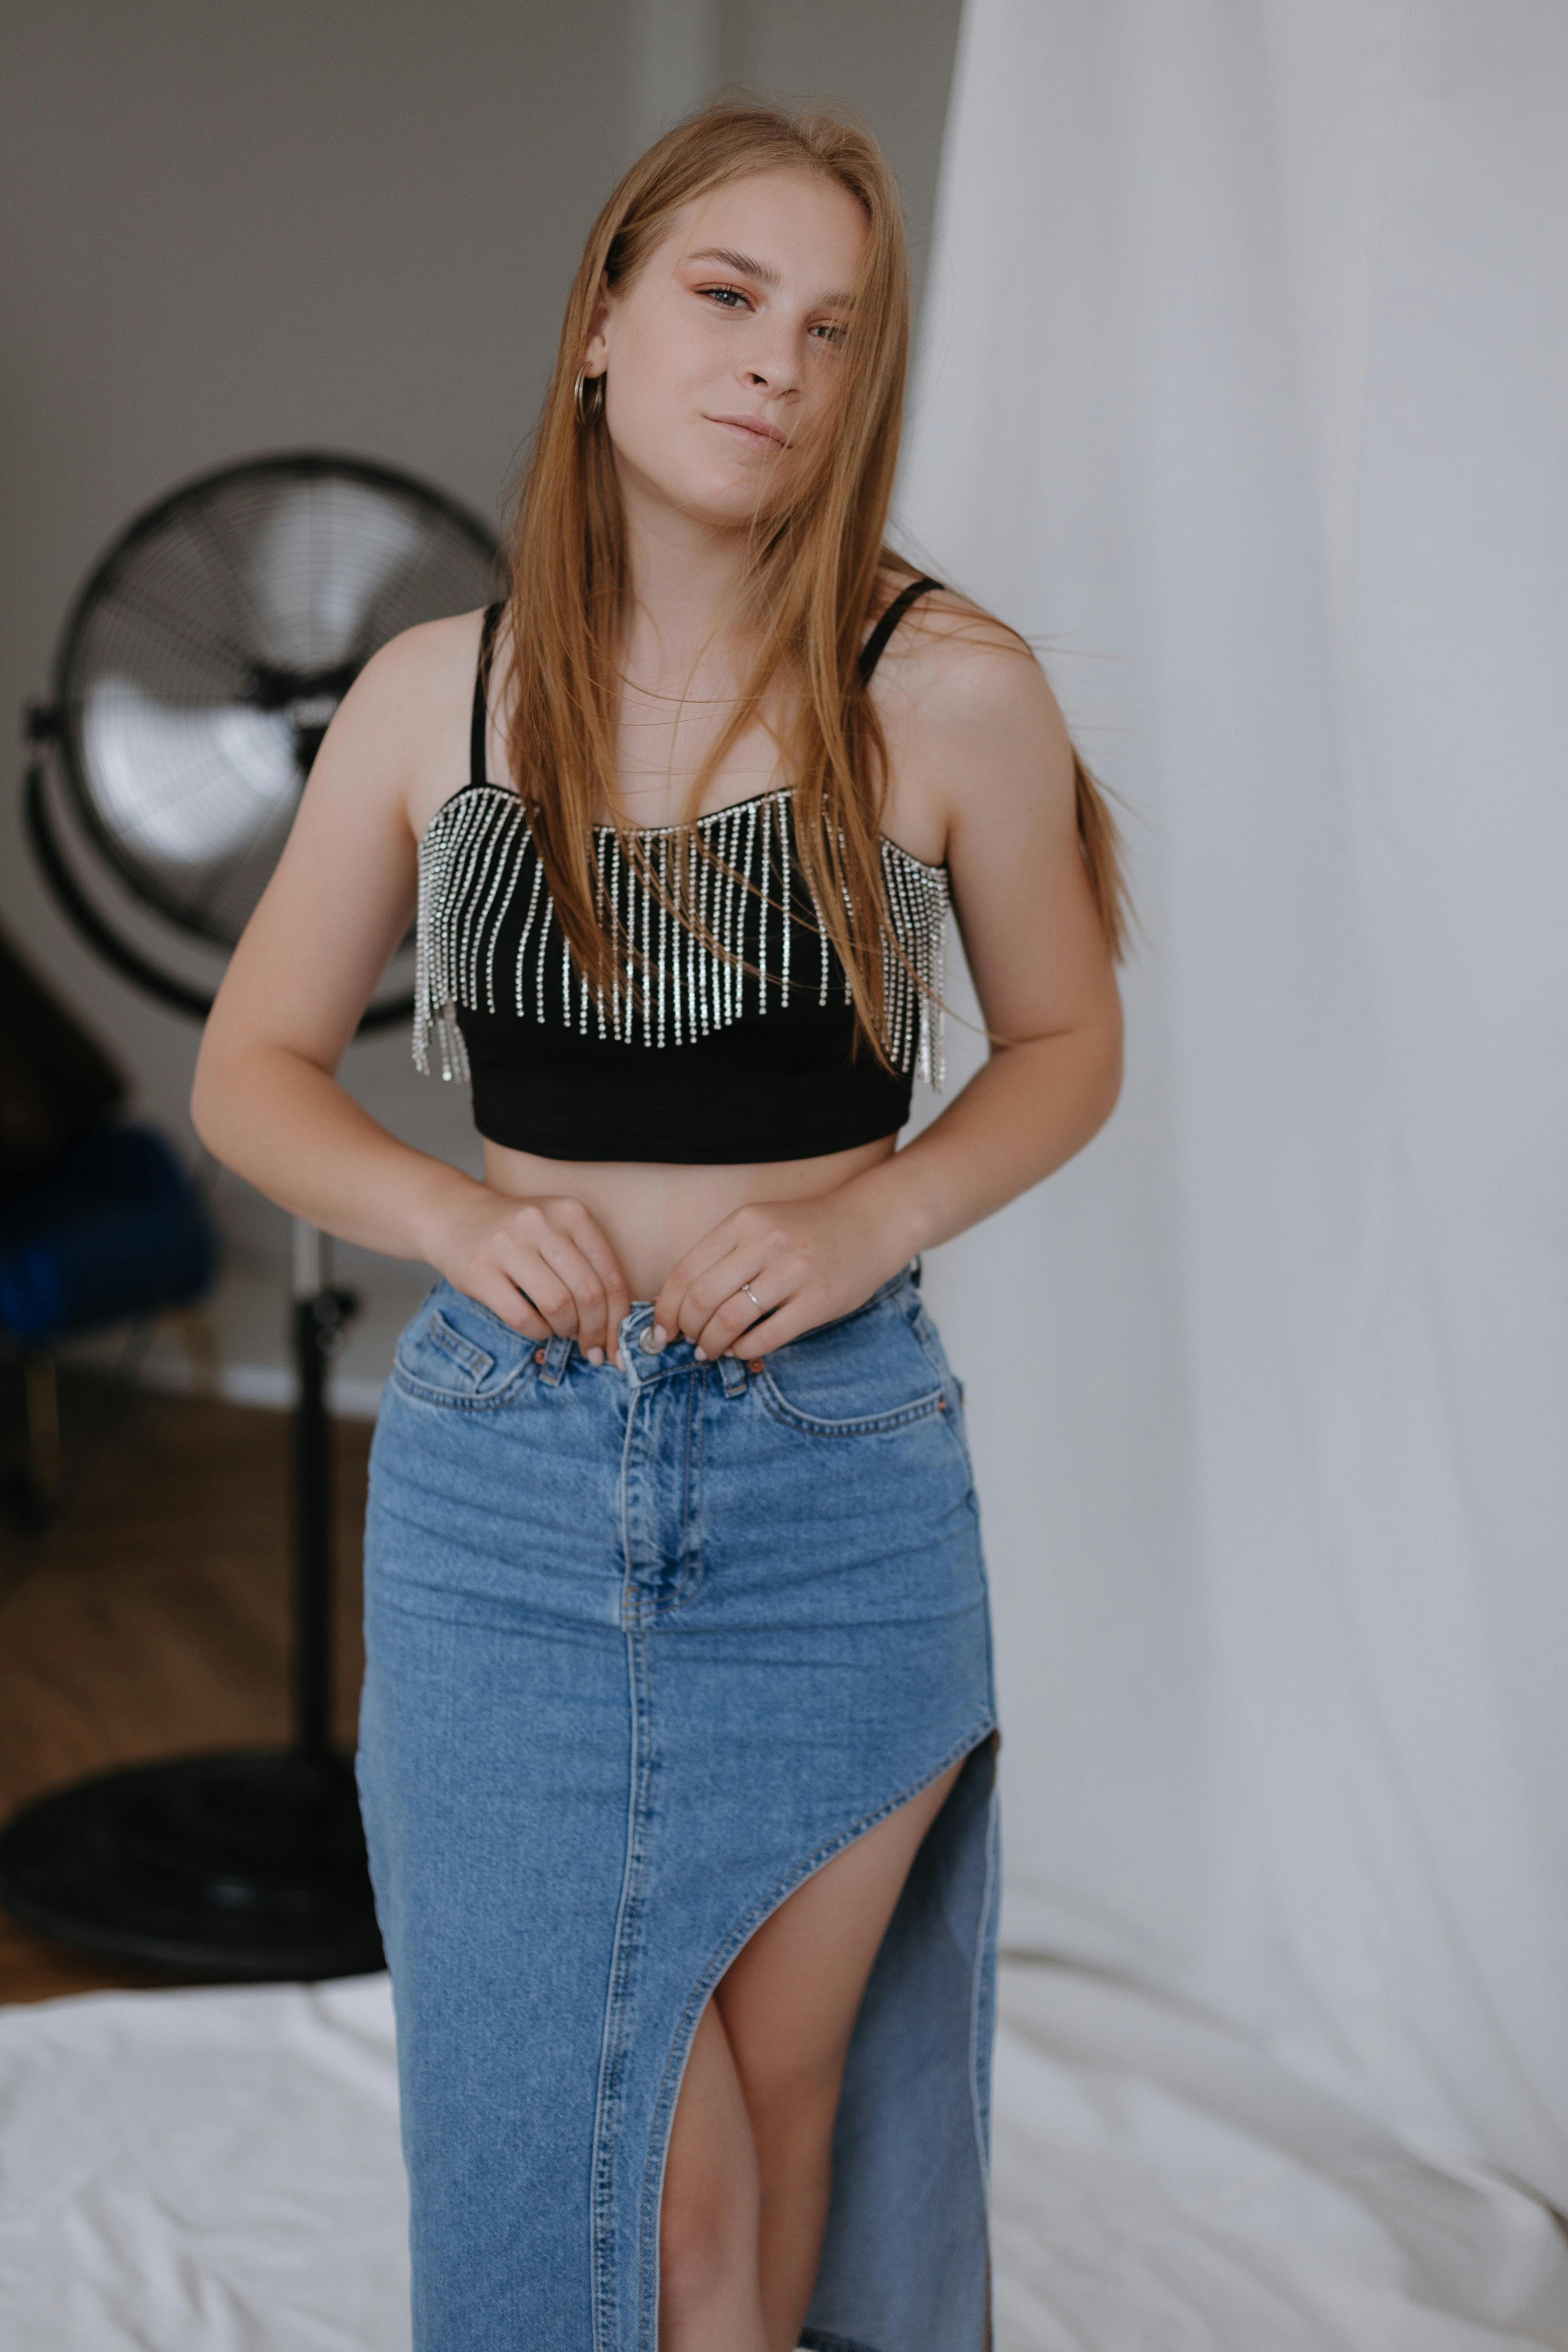 Young Blonde Woman in Blue Denim Skirt and Black Crop Top Sitting on a ...